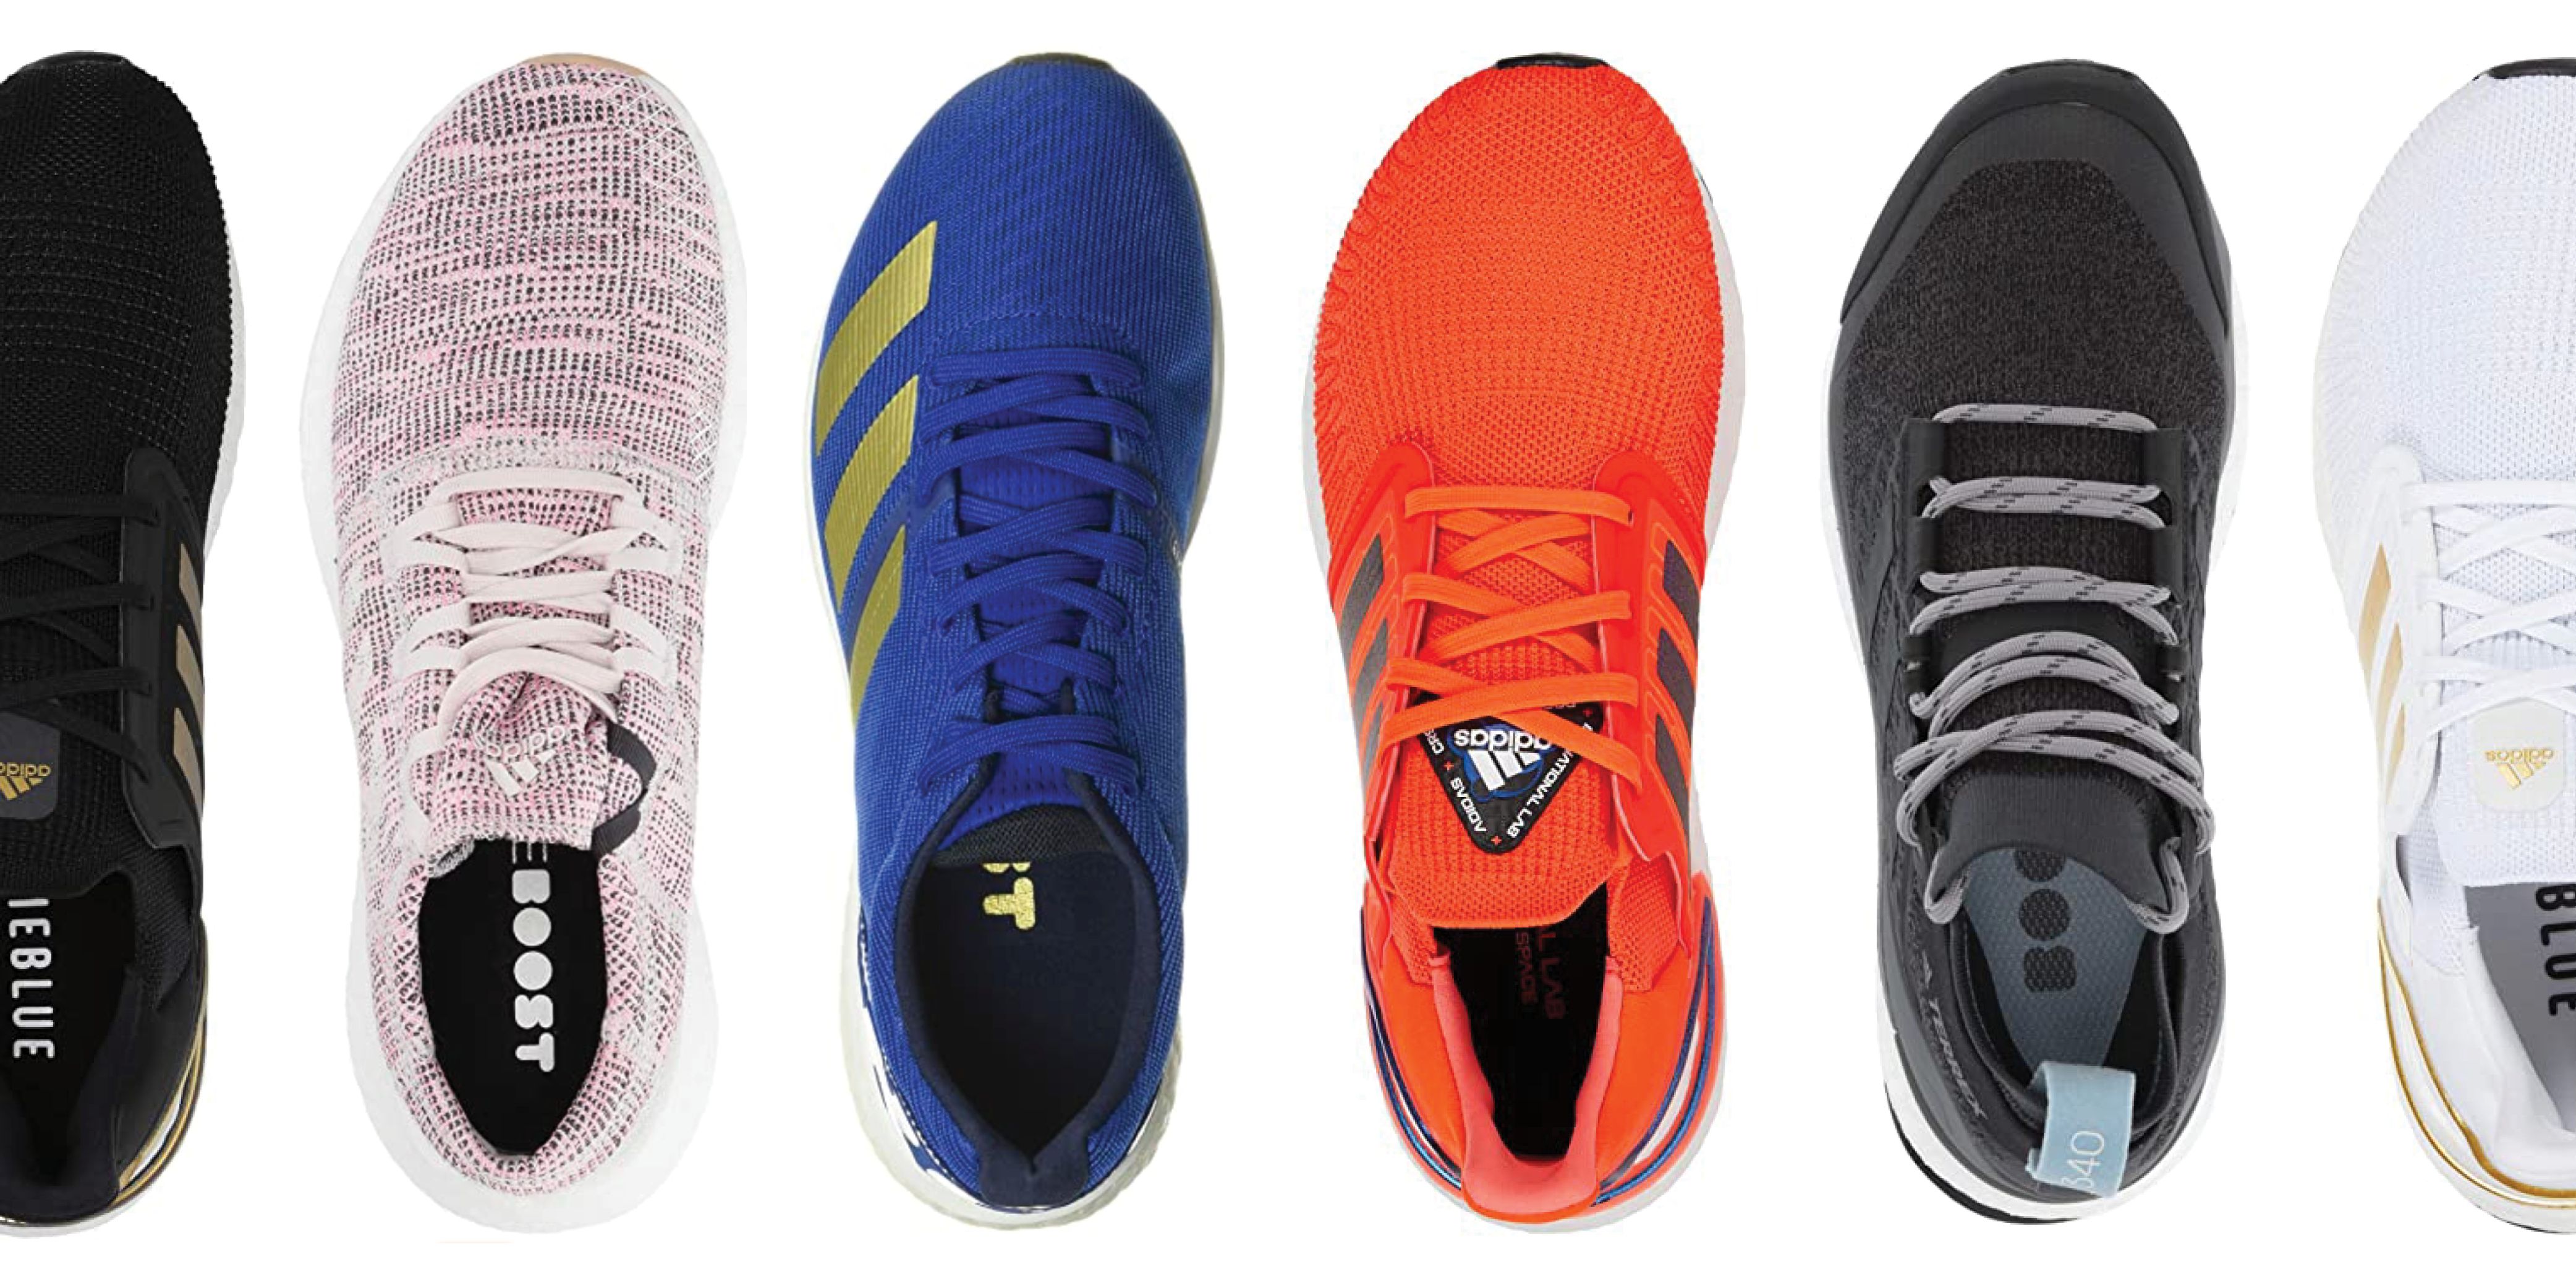 Best Adidas Running Shoes 2021 | Adidas Shoe Reviews